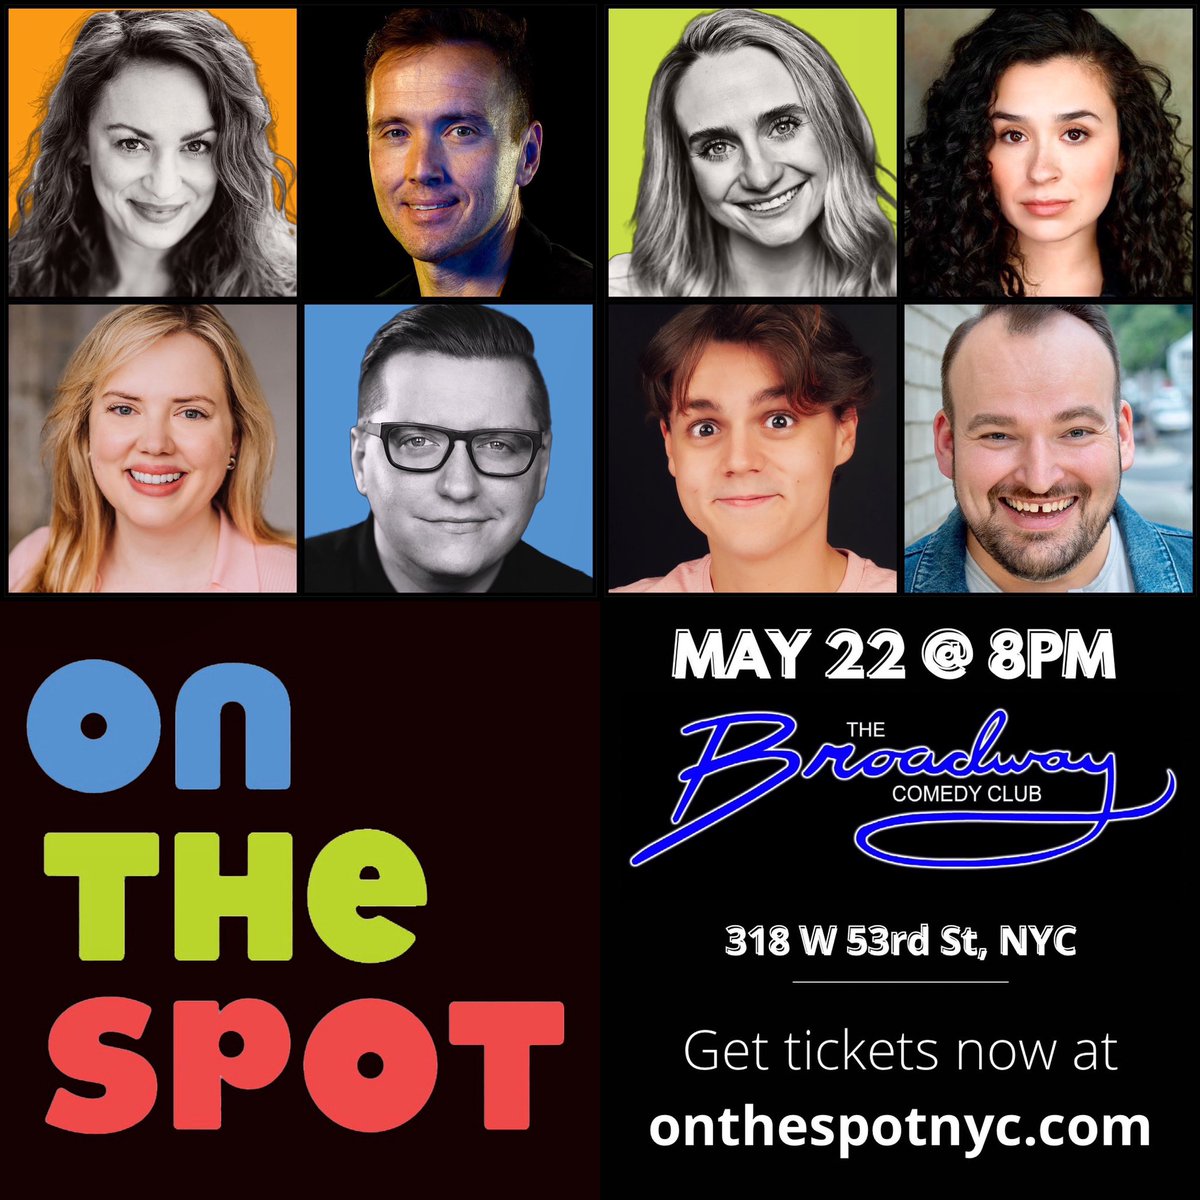 Don’t miss the creation of a HOT new musical right before your very eyes at #OnTheSpotNYC tonight! 😍🎶✨

Tickets at linktr.ee/onthespotnyc 🎫 

#Cabaret #Comedy #Improv #ImprovComedy #MusicalImprov